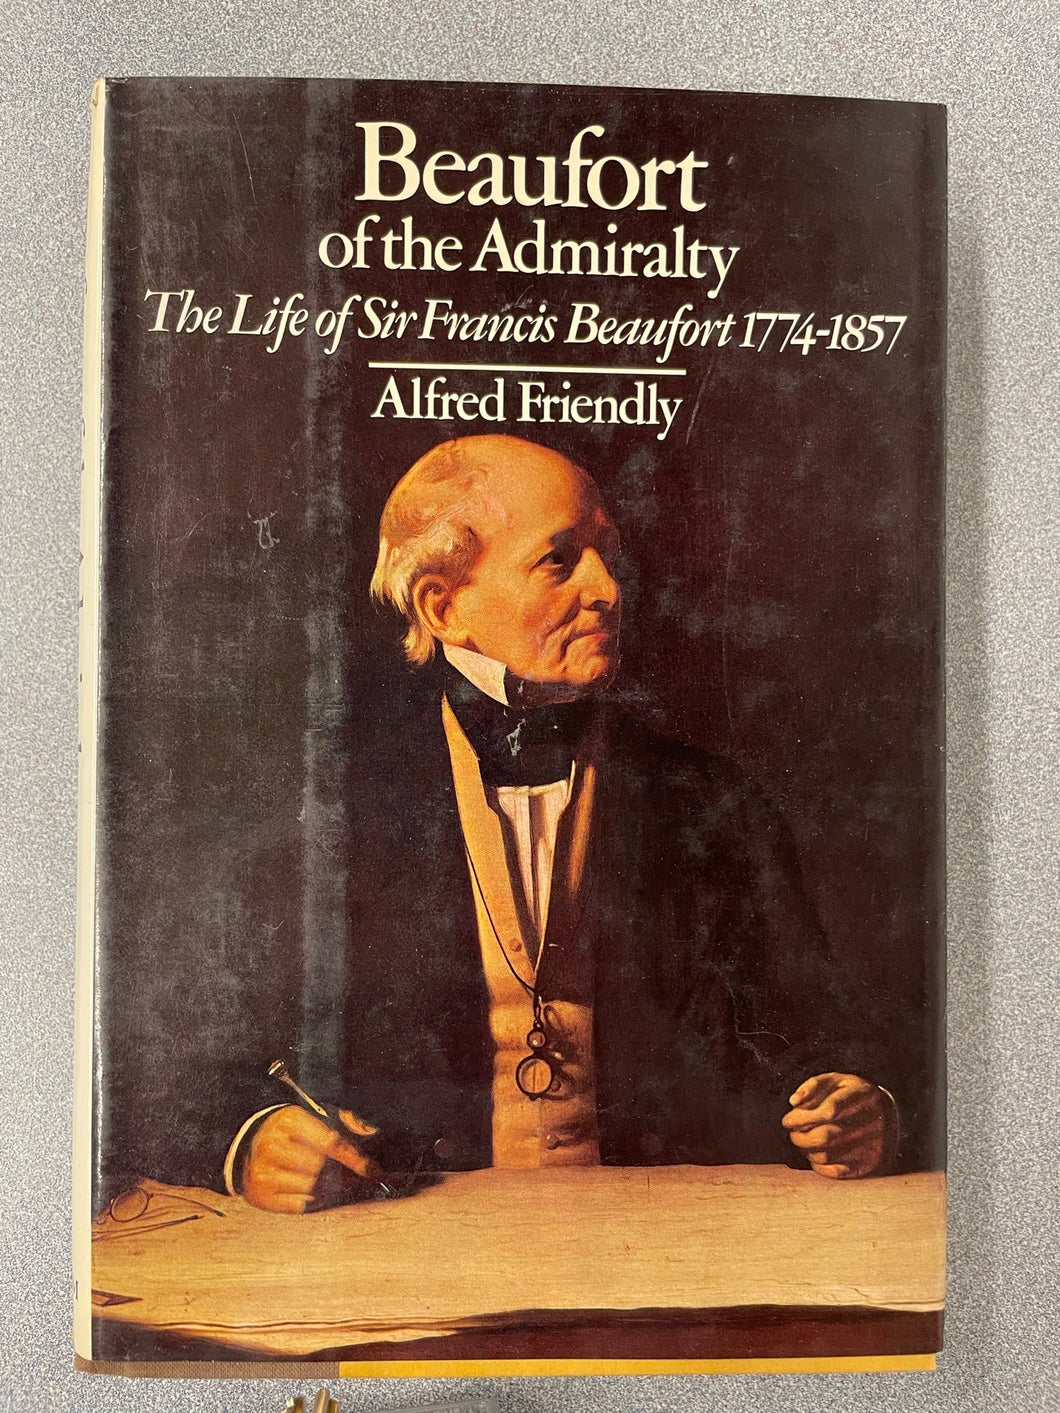 Beaufort of the Admiralty: The Life of Sir Francis Beaufort 1774-1857, Friendly, Alfred [1977] BI 3/23